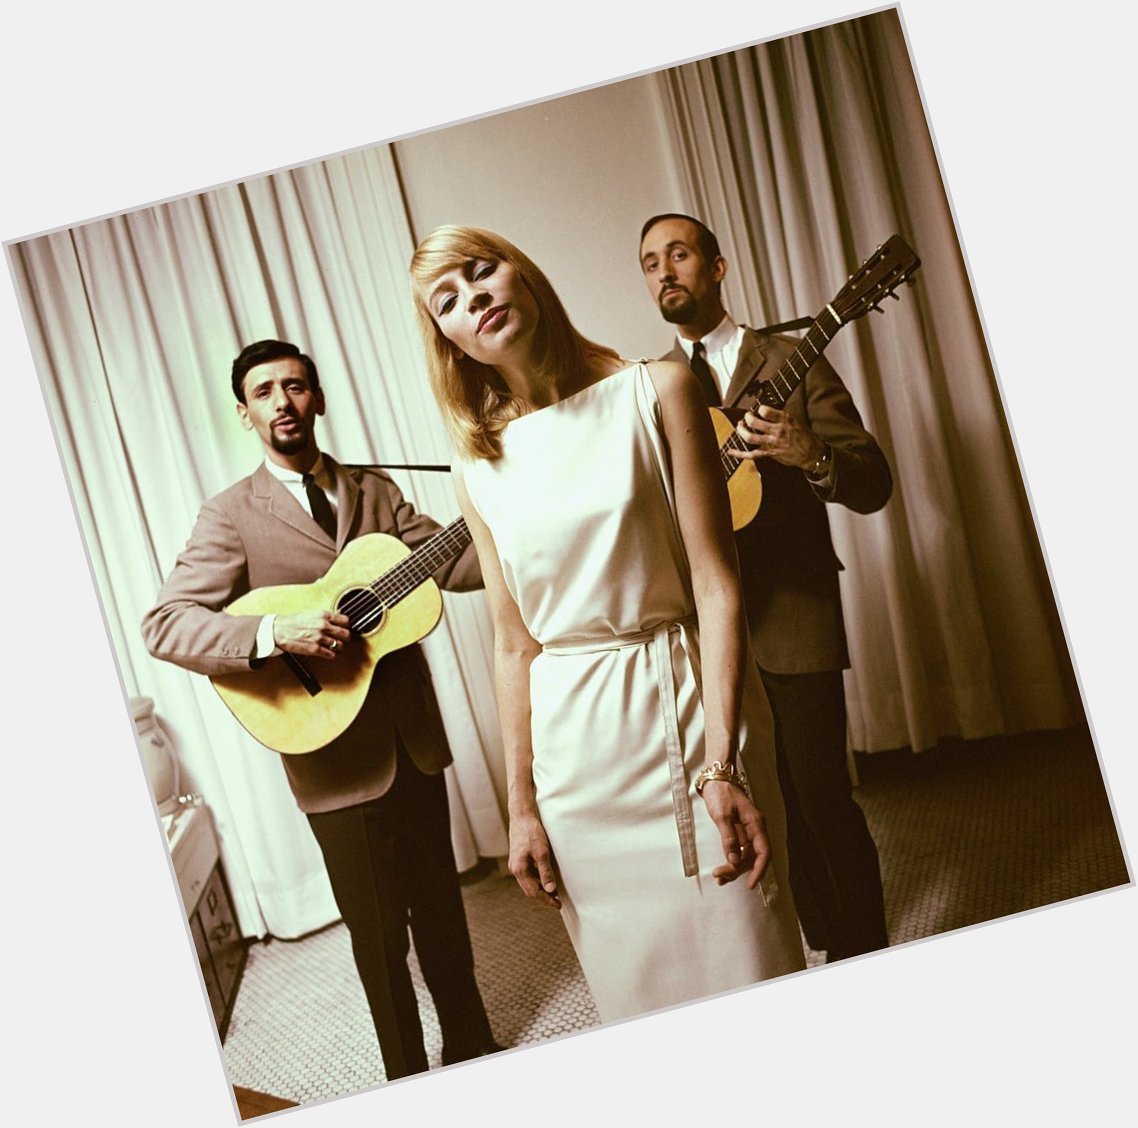 Happy Birthday to Mary Travers(middle) of Peter, Paul & Mary, who would have turned 81 today! 